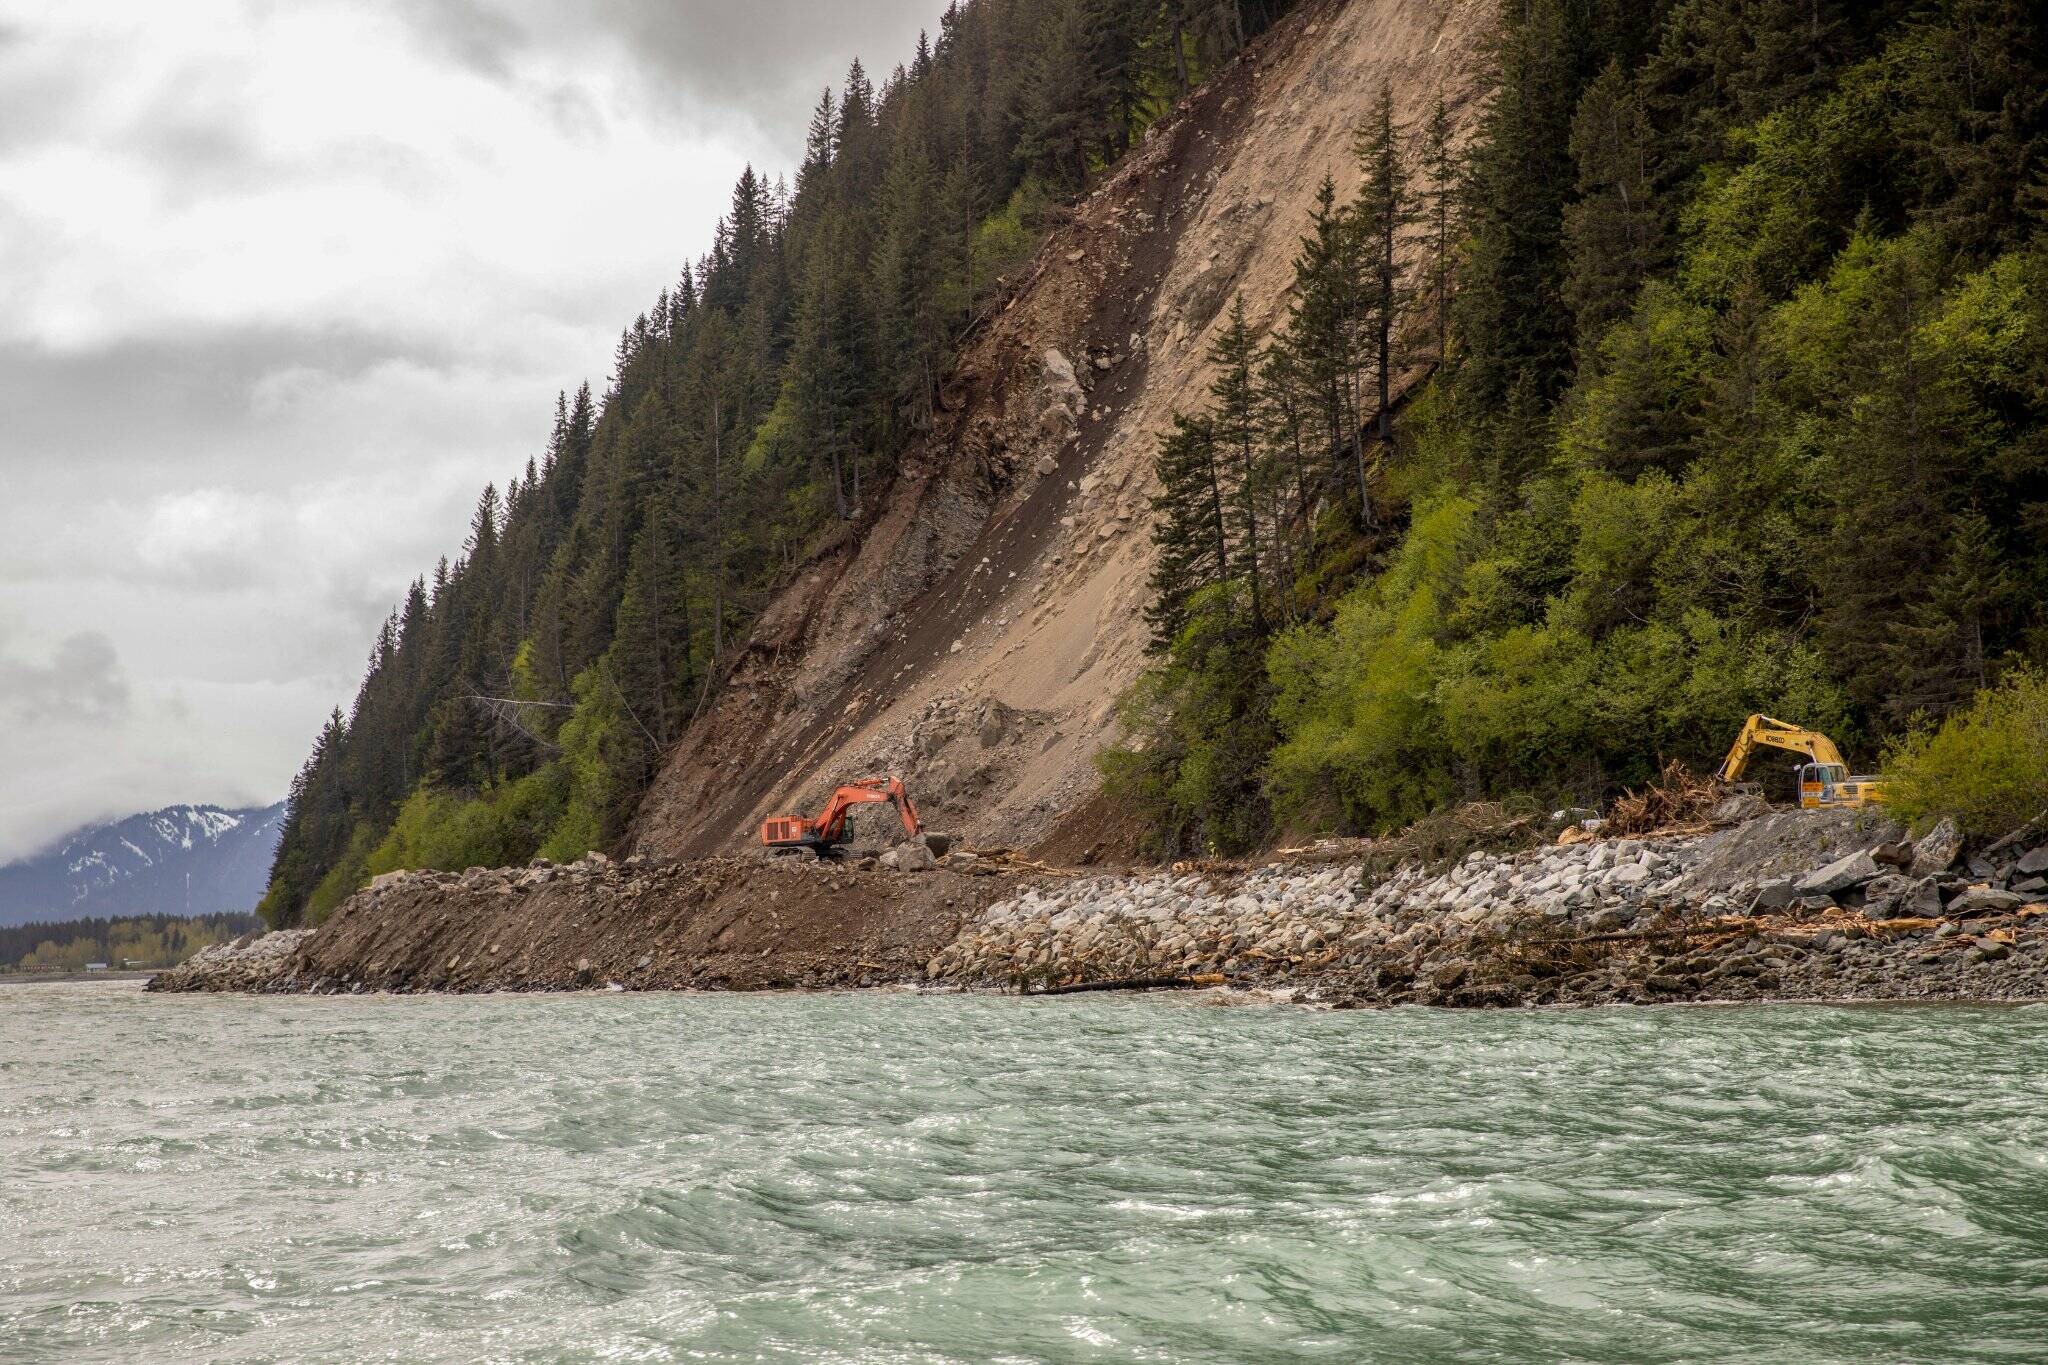 Employees of Metco Alaska work to remove debris from the Lowell Point Road May 23, 2022, following the May 7 Bear Mountain landslide that blocked the road and access to and from the community of Lowell Point. (Photo and caption courtesy of the Kenai Peninsula Borough)